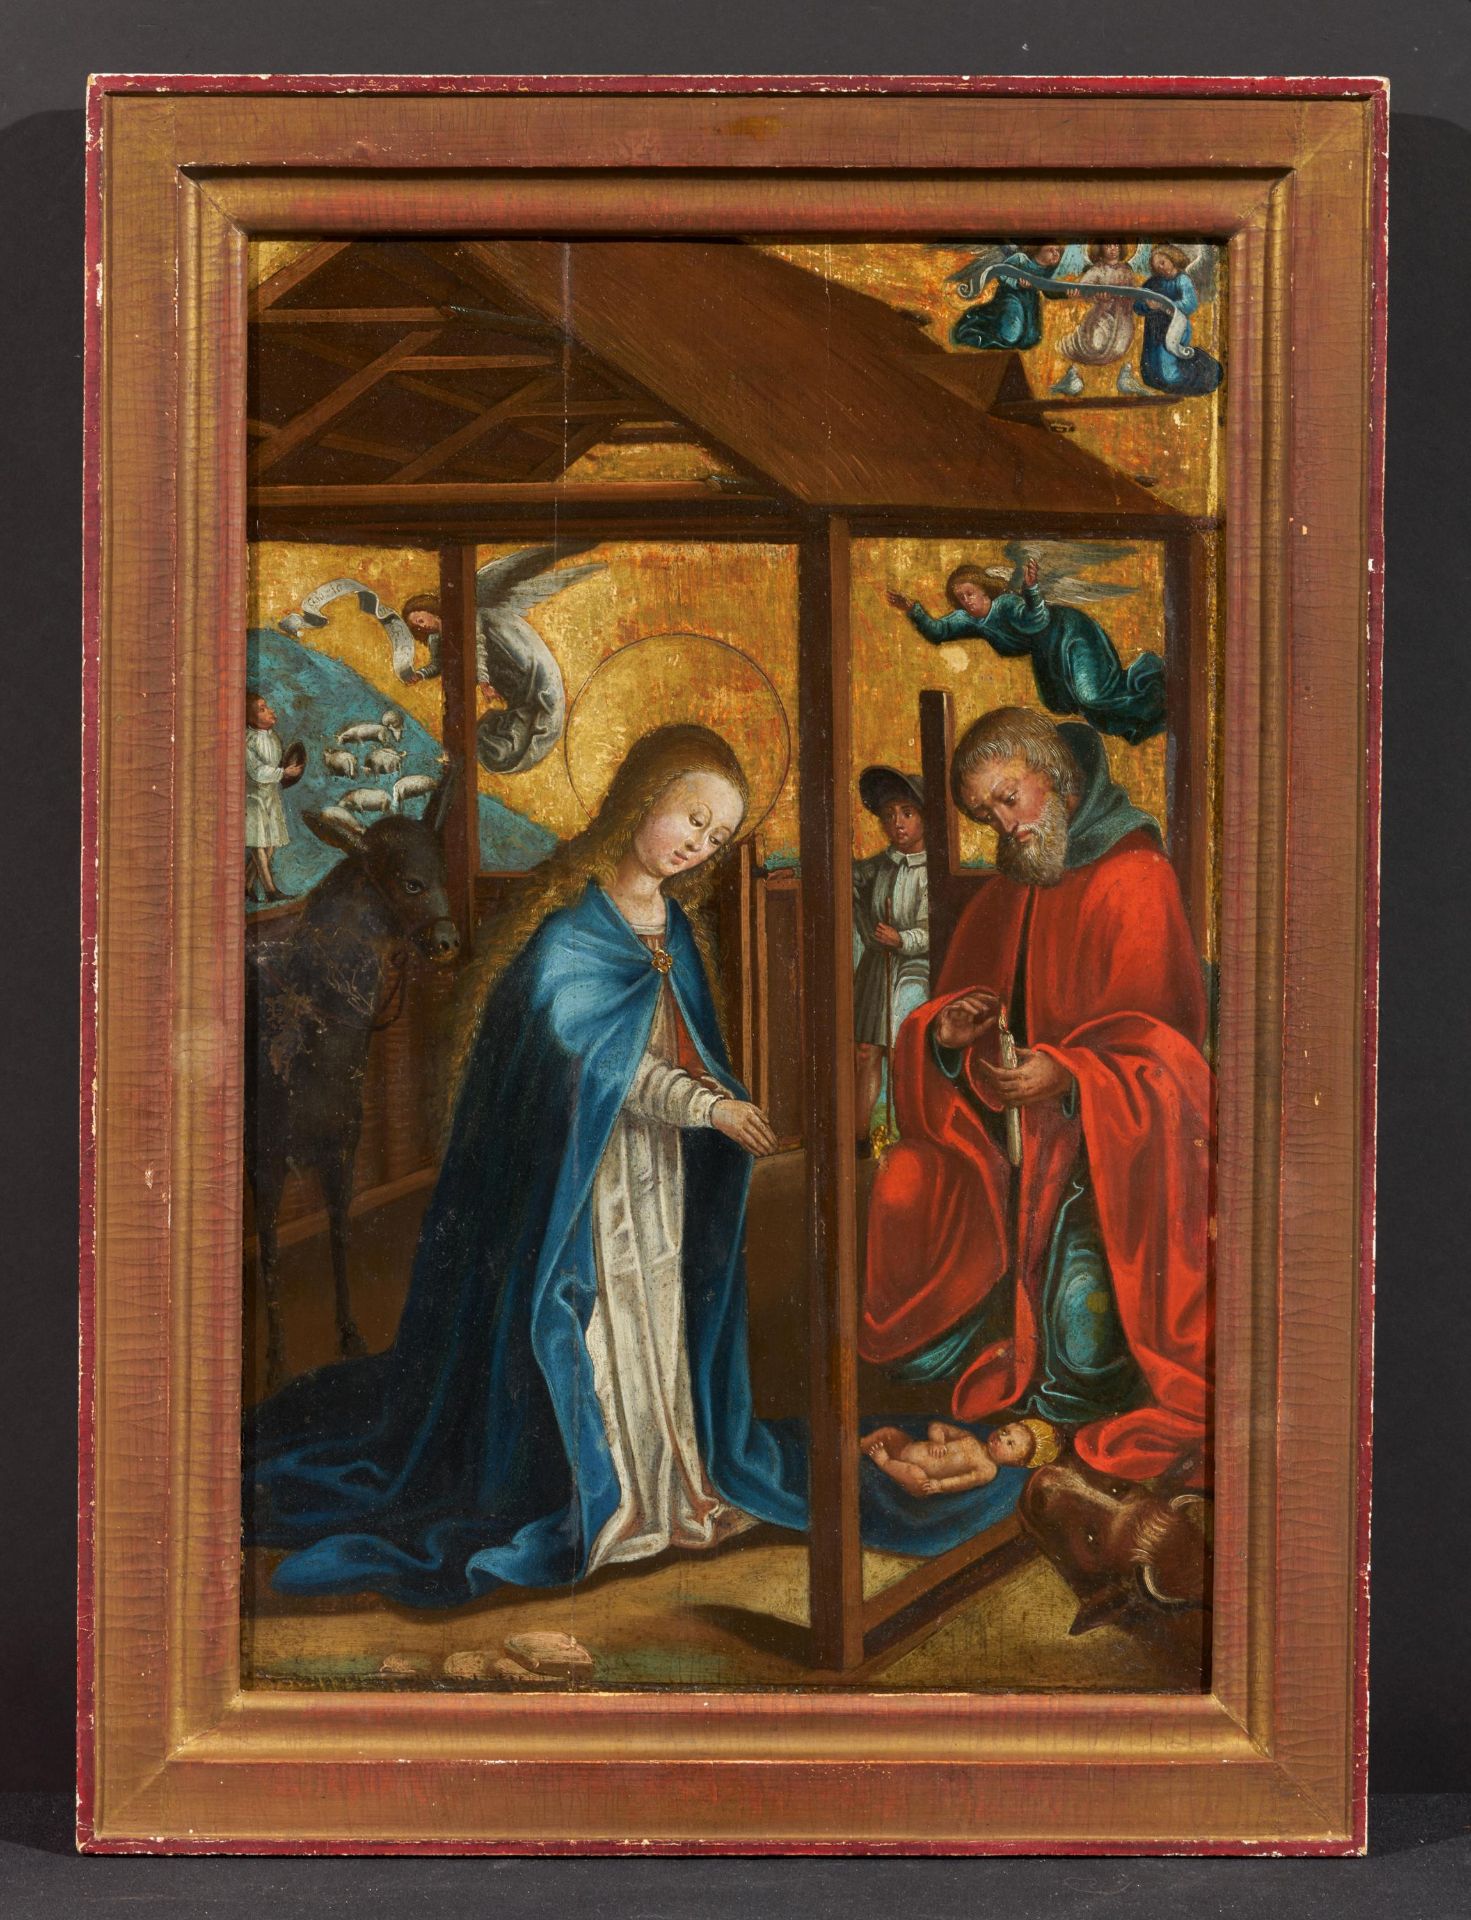 South German School: Birth of Christ and Annunciation to the Shepherds - Image 2 of 4